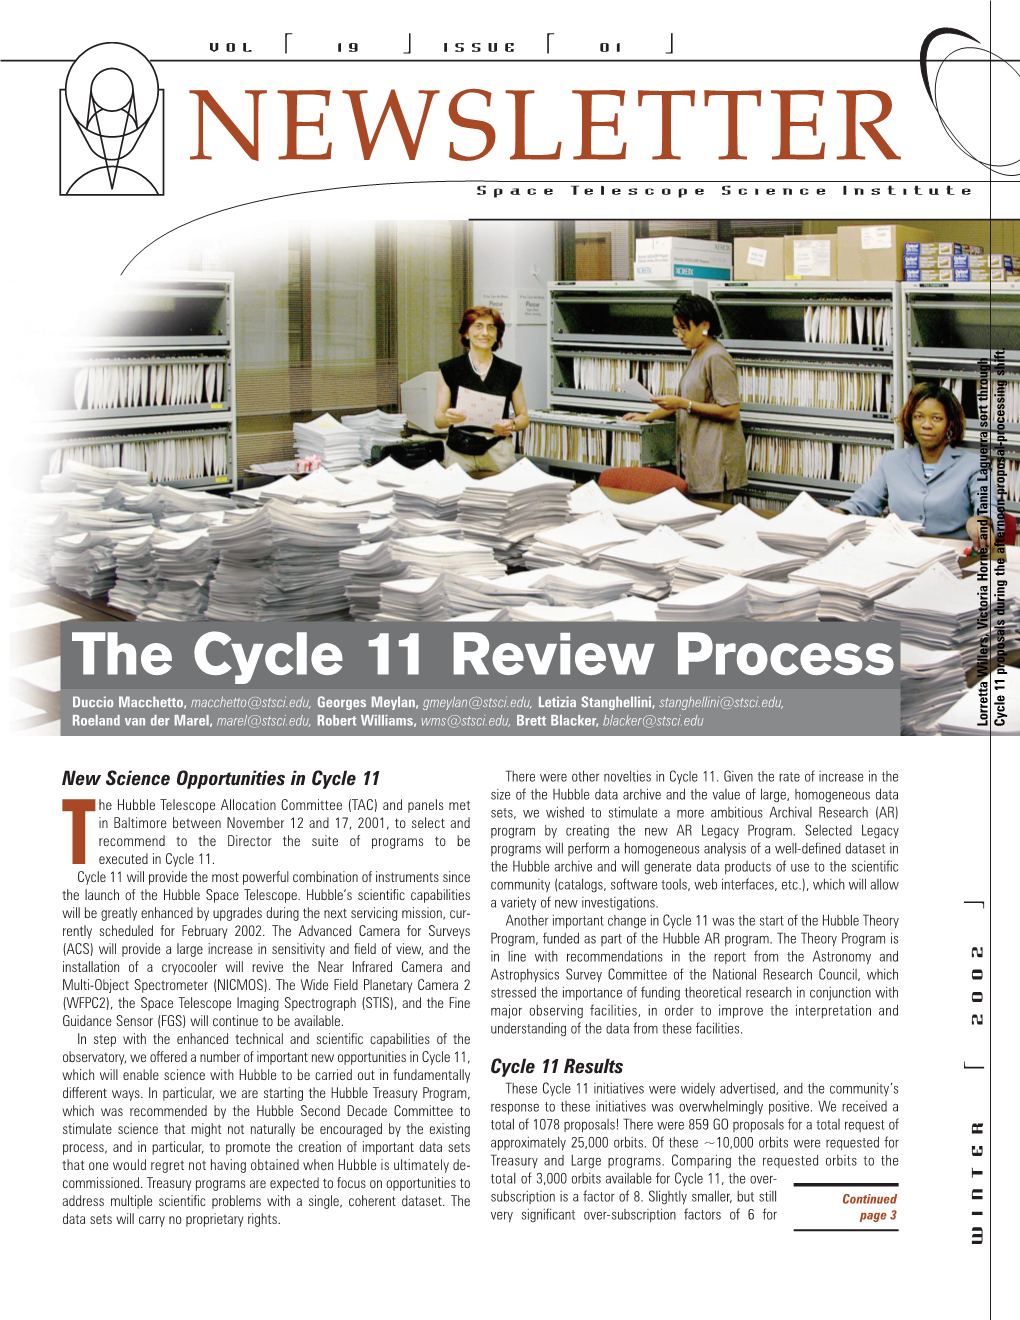 The Cycle 11 Review Process